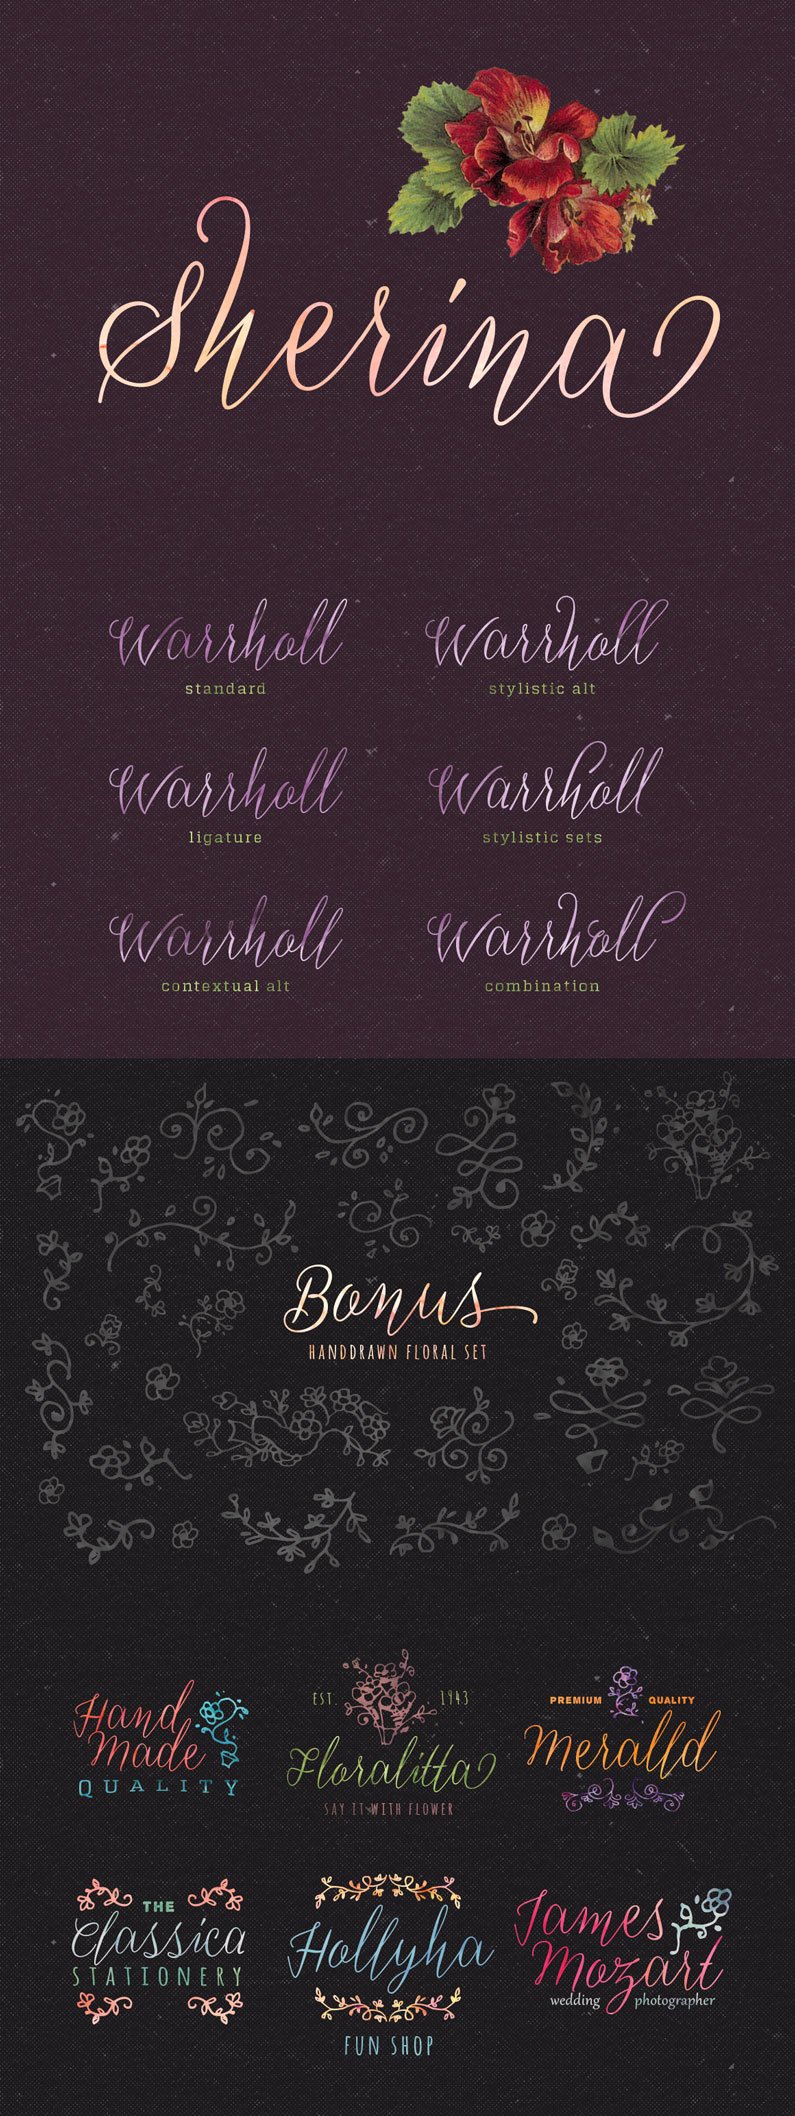 Sherina is hand written script that is fun and casual. It is suitable for wedding invitation, any greeting cards, retro / vintage design style, or any design that needs natural and personal touch.